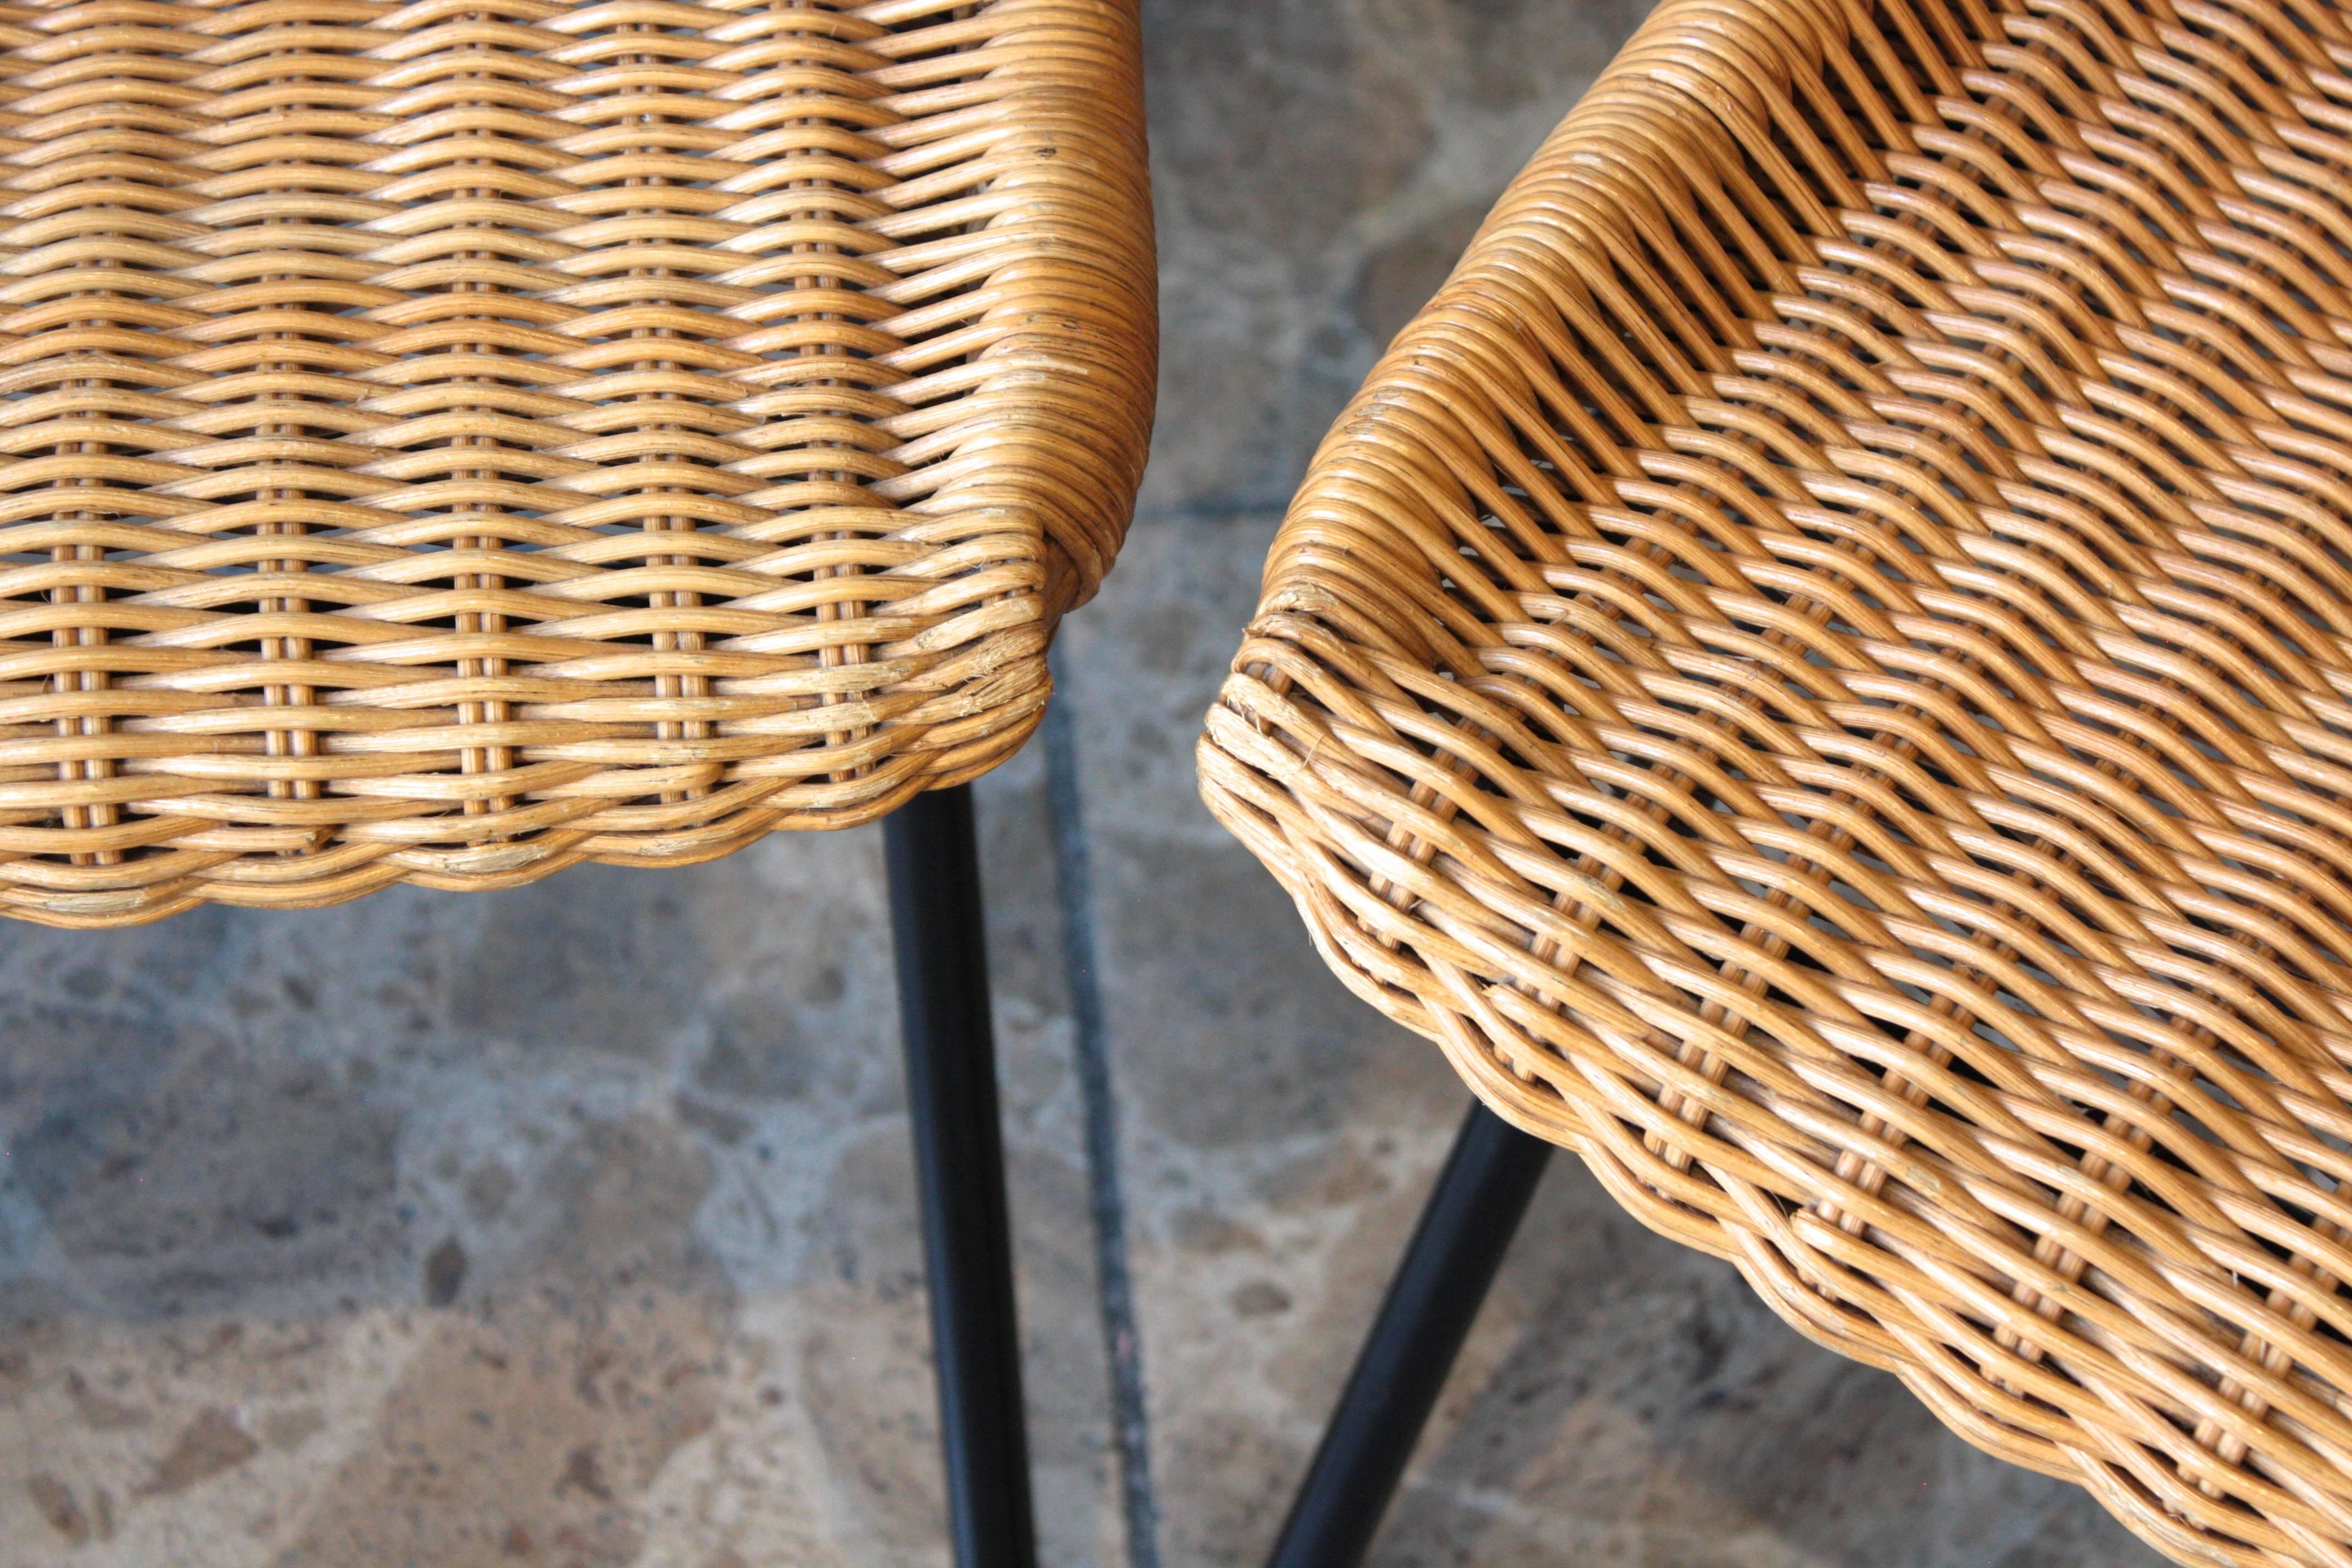 This set of two rattan chairs was designed by Dirk van Sliedregt and produced by Rohé Noordwolde in the Netherlands.